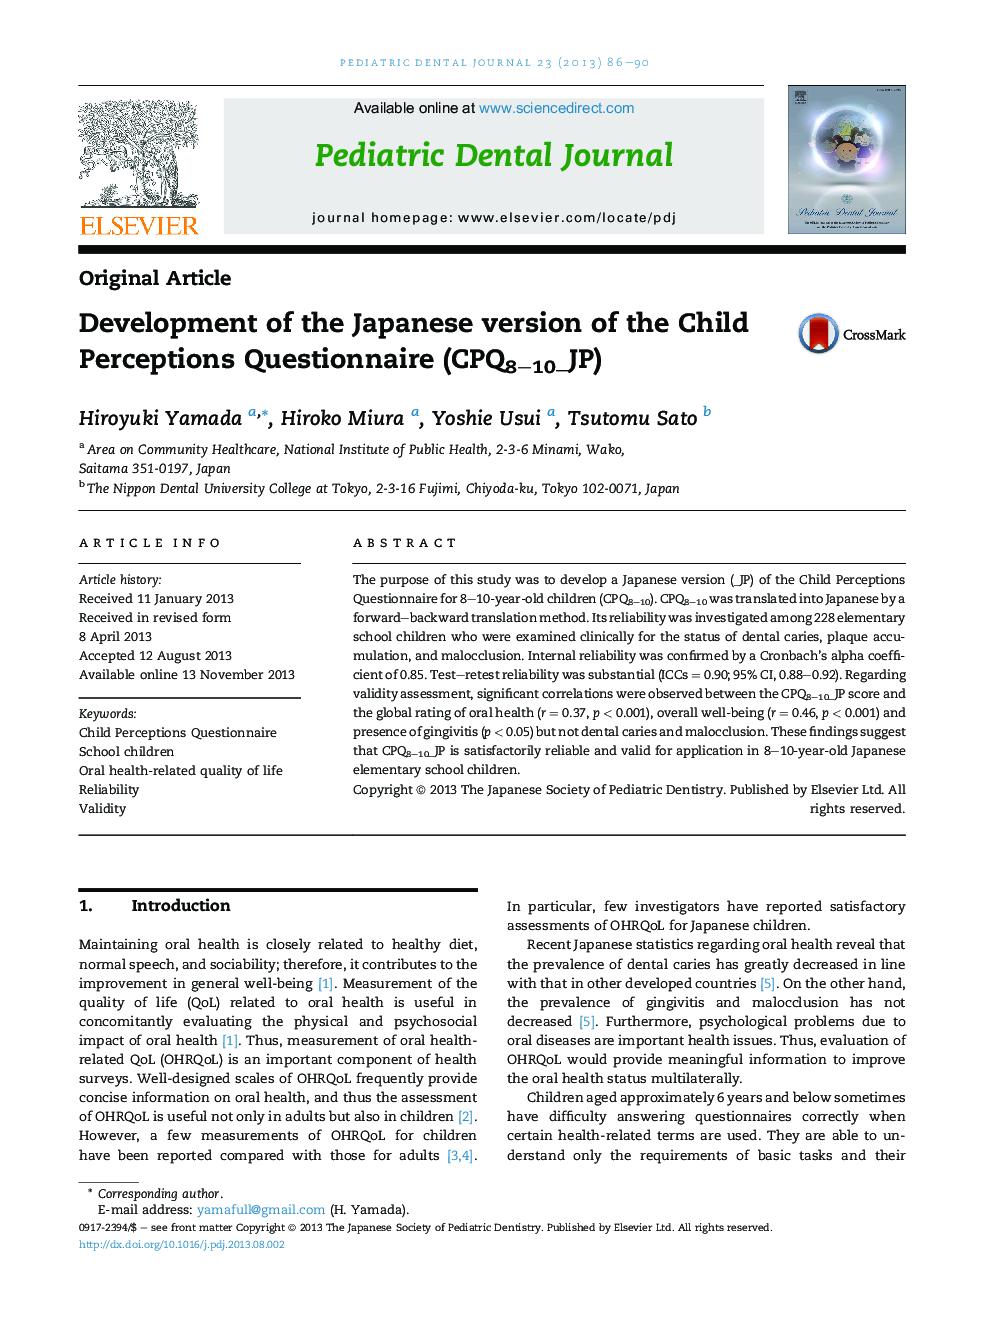 Development of the Japanese version of the Child Perceptions Questionnaire (CPQ8-10_JP)